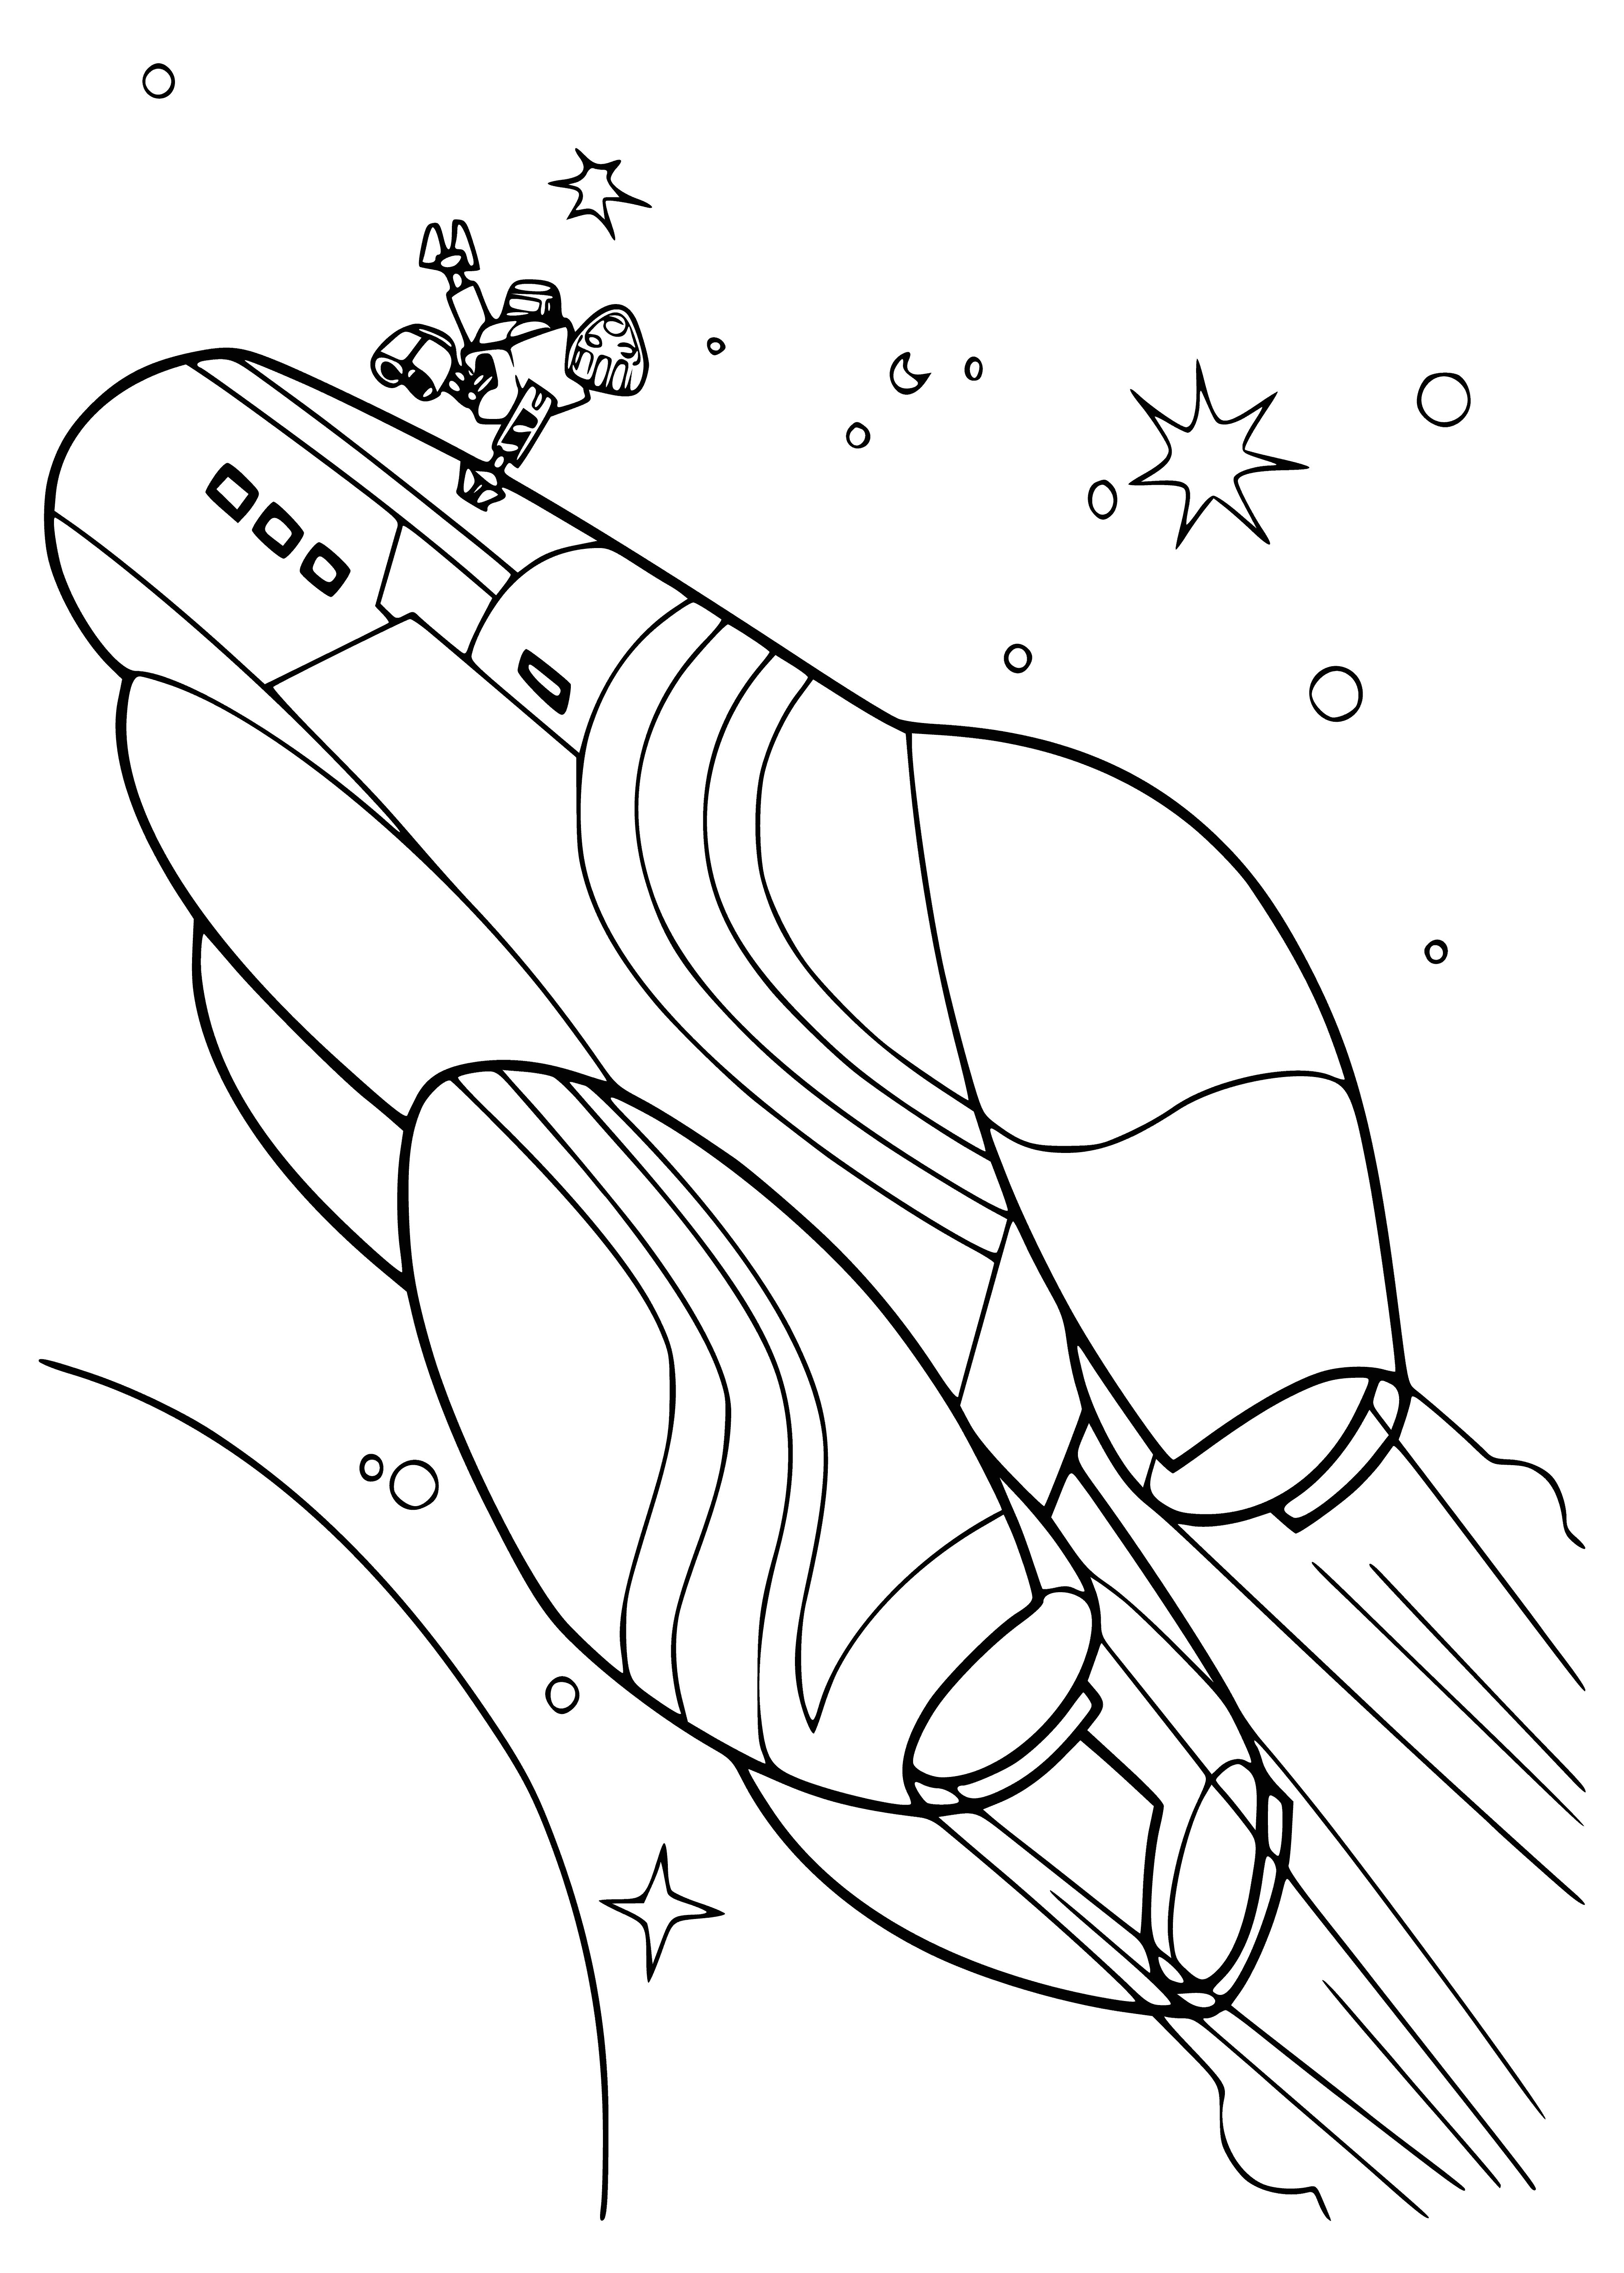 coloring page: Rocket blasting off sky with 4 large boosters strapped to main body, firing fast with bright orange flame at base of each. #space